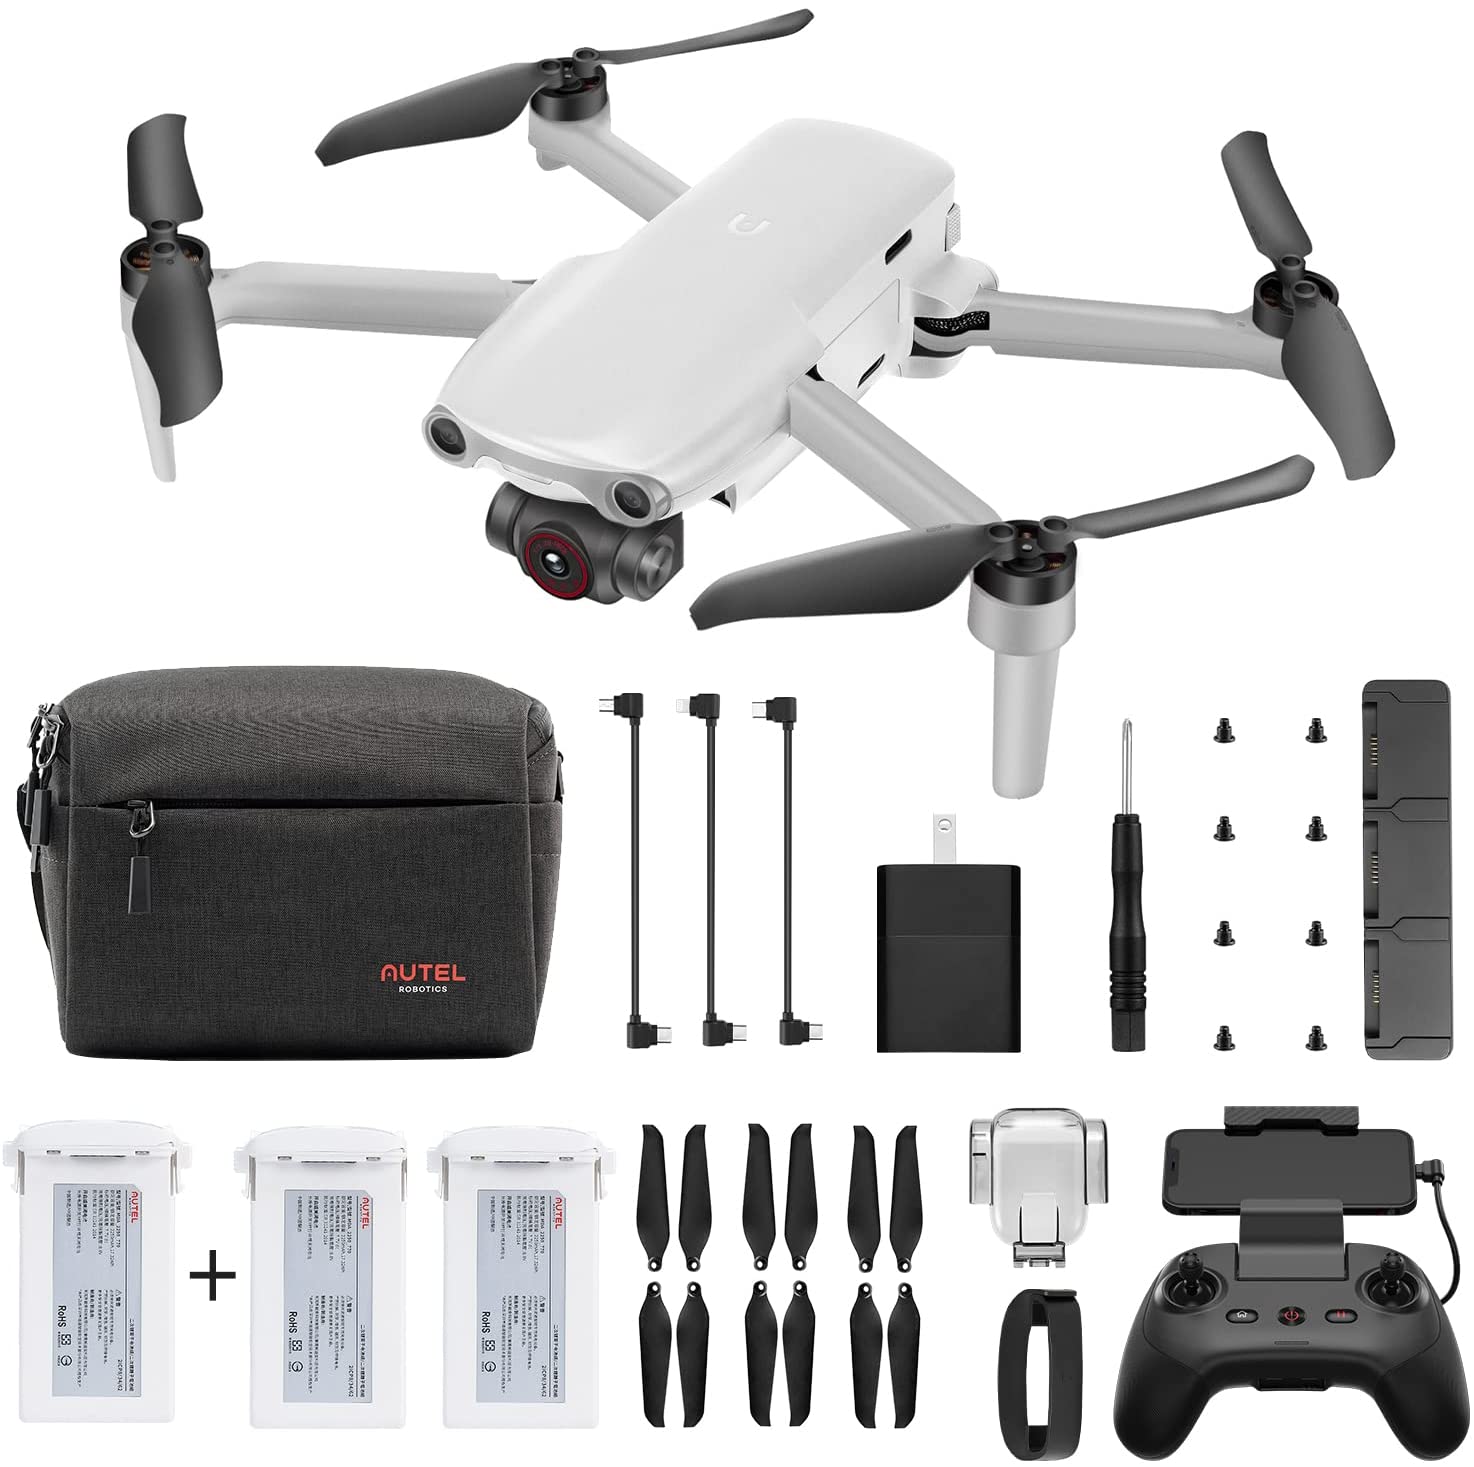 Autel Robotics EVO Nano+ Drone, 1/2" CMOS 48MP 4K/30fps HDR Video Master Subject Tracking Advanced Obstacle Avoidance 10km 2.7K Video Transmission, 249g Ultralight Foldable Camera Quadcopter with 3-Axis Gimbal